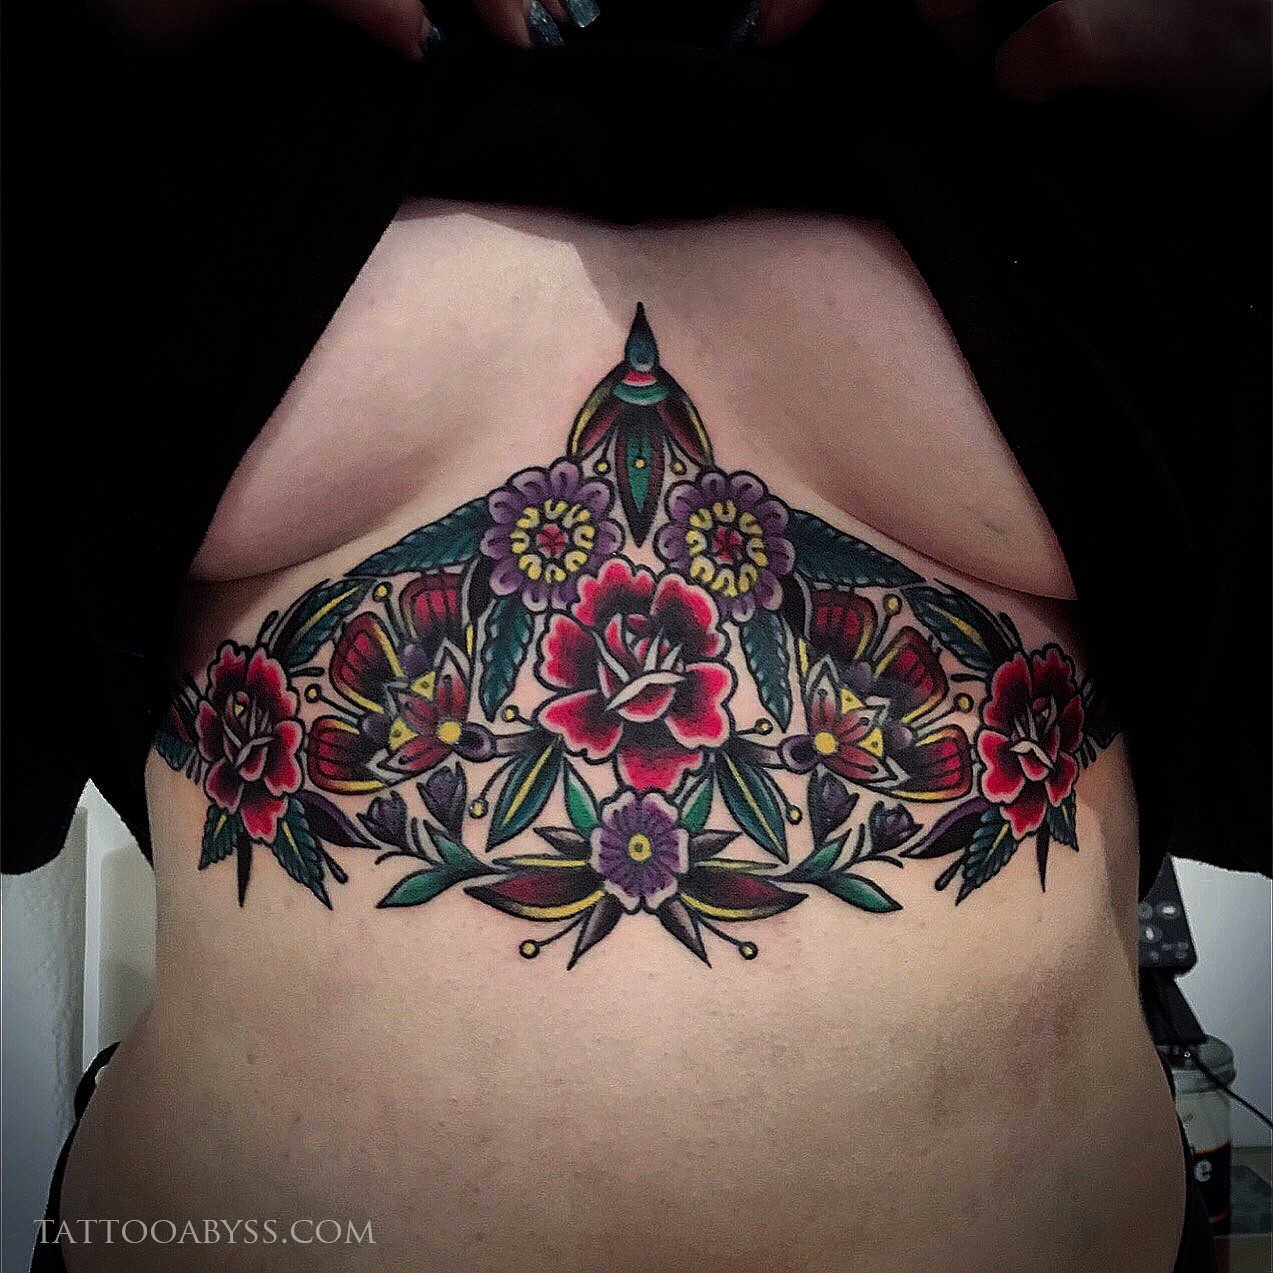 STERNUM TATTOO PAIN  HOW TO COPE WITH IT  10 AMAZING DESIGNS  alexie